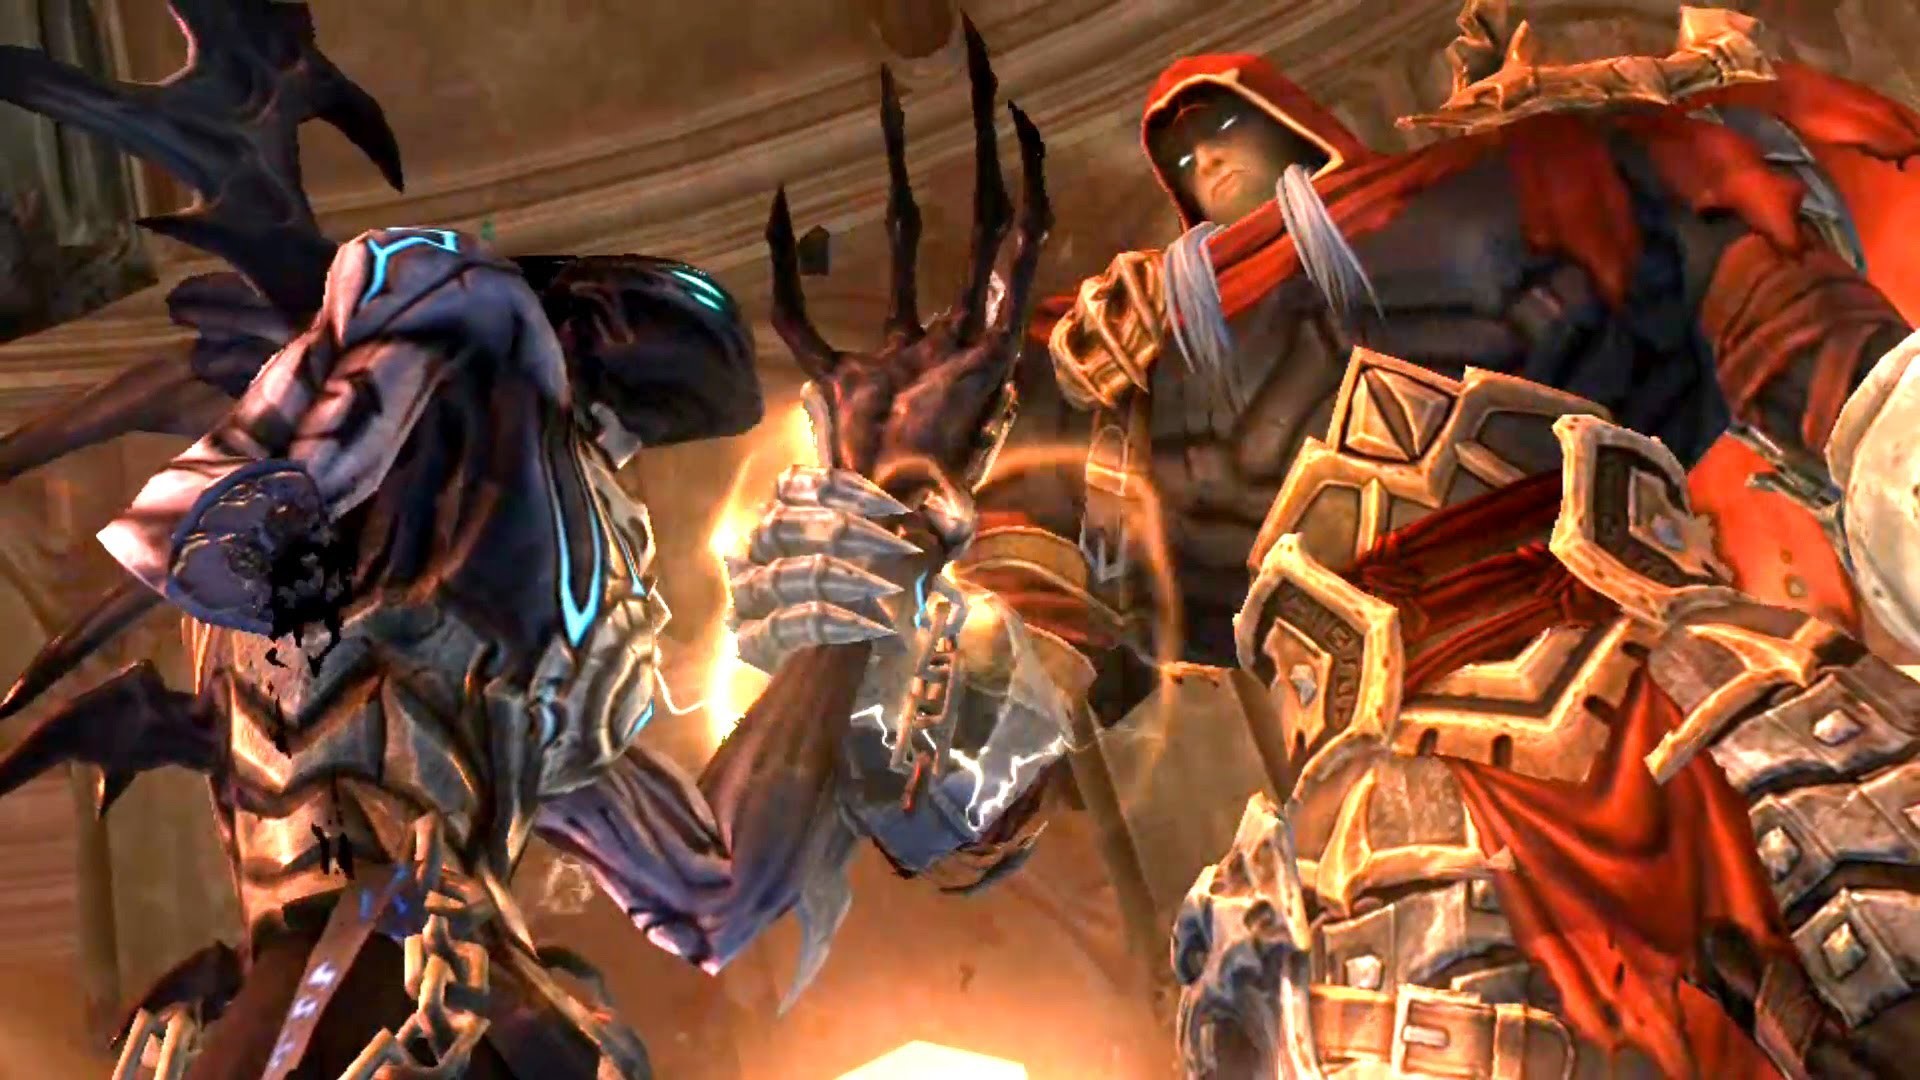 1920x1080 No, Not Alone: Three Horsemen of Apocalypse Join the War (Darksiders 1 |  Game Ending) - YouTube